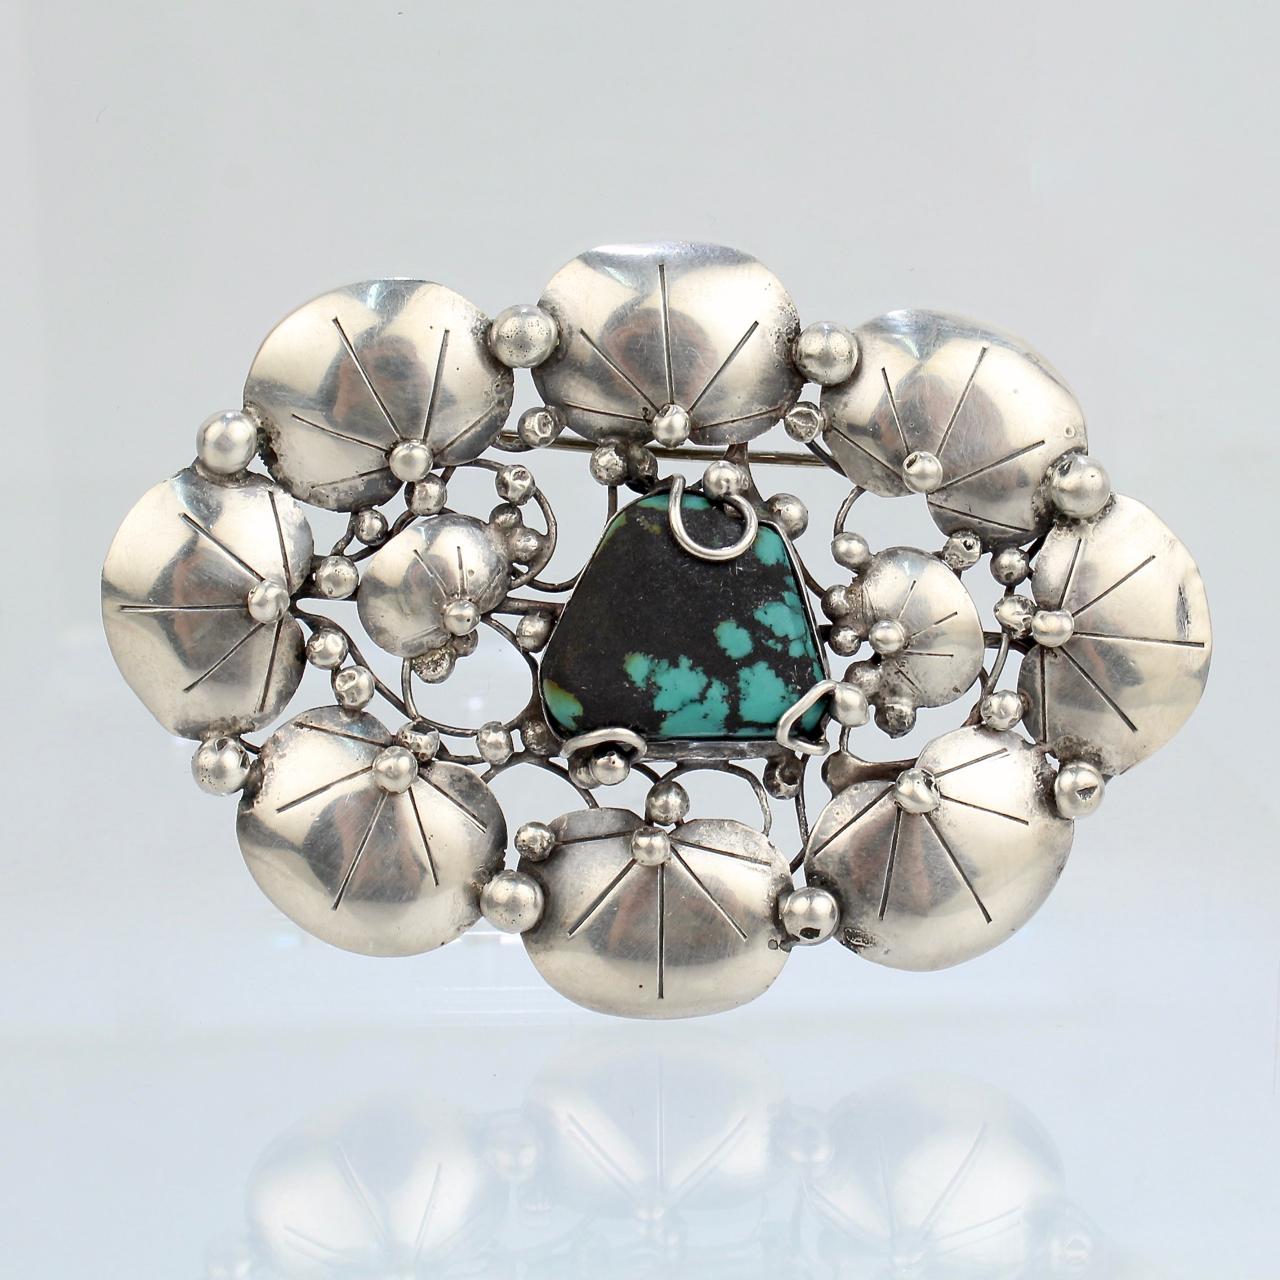 A wonderful Mary Gage lily pad brooch. 

In sterling silver with stylized lily pads surrounding a central turquoise gemstone. 

Marked to the reverse Sterling and Mary Gage.

Simply a wonderful brooch from a renowned female American jewelry